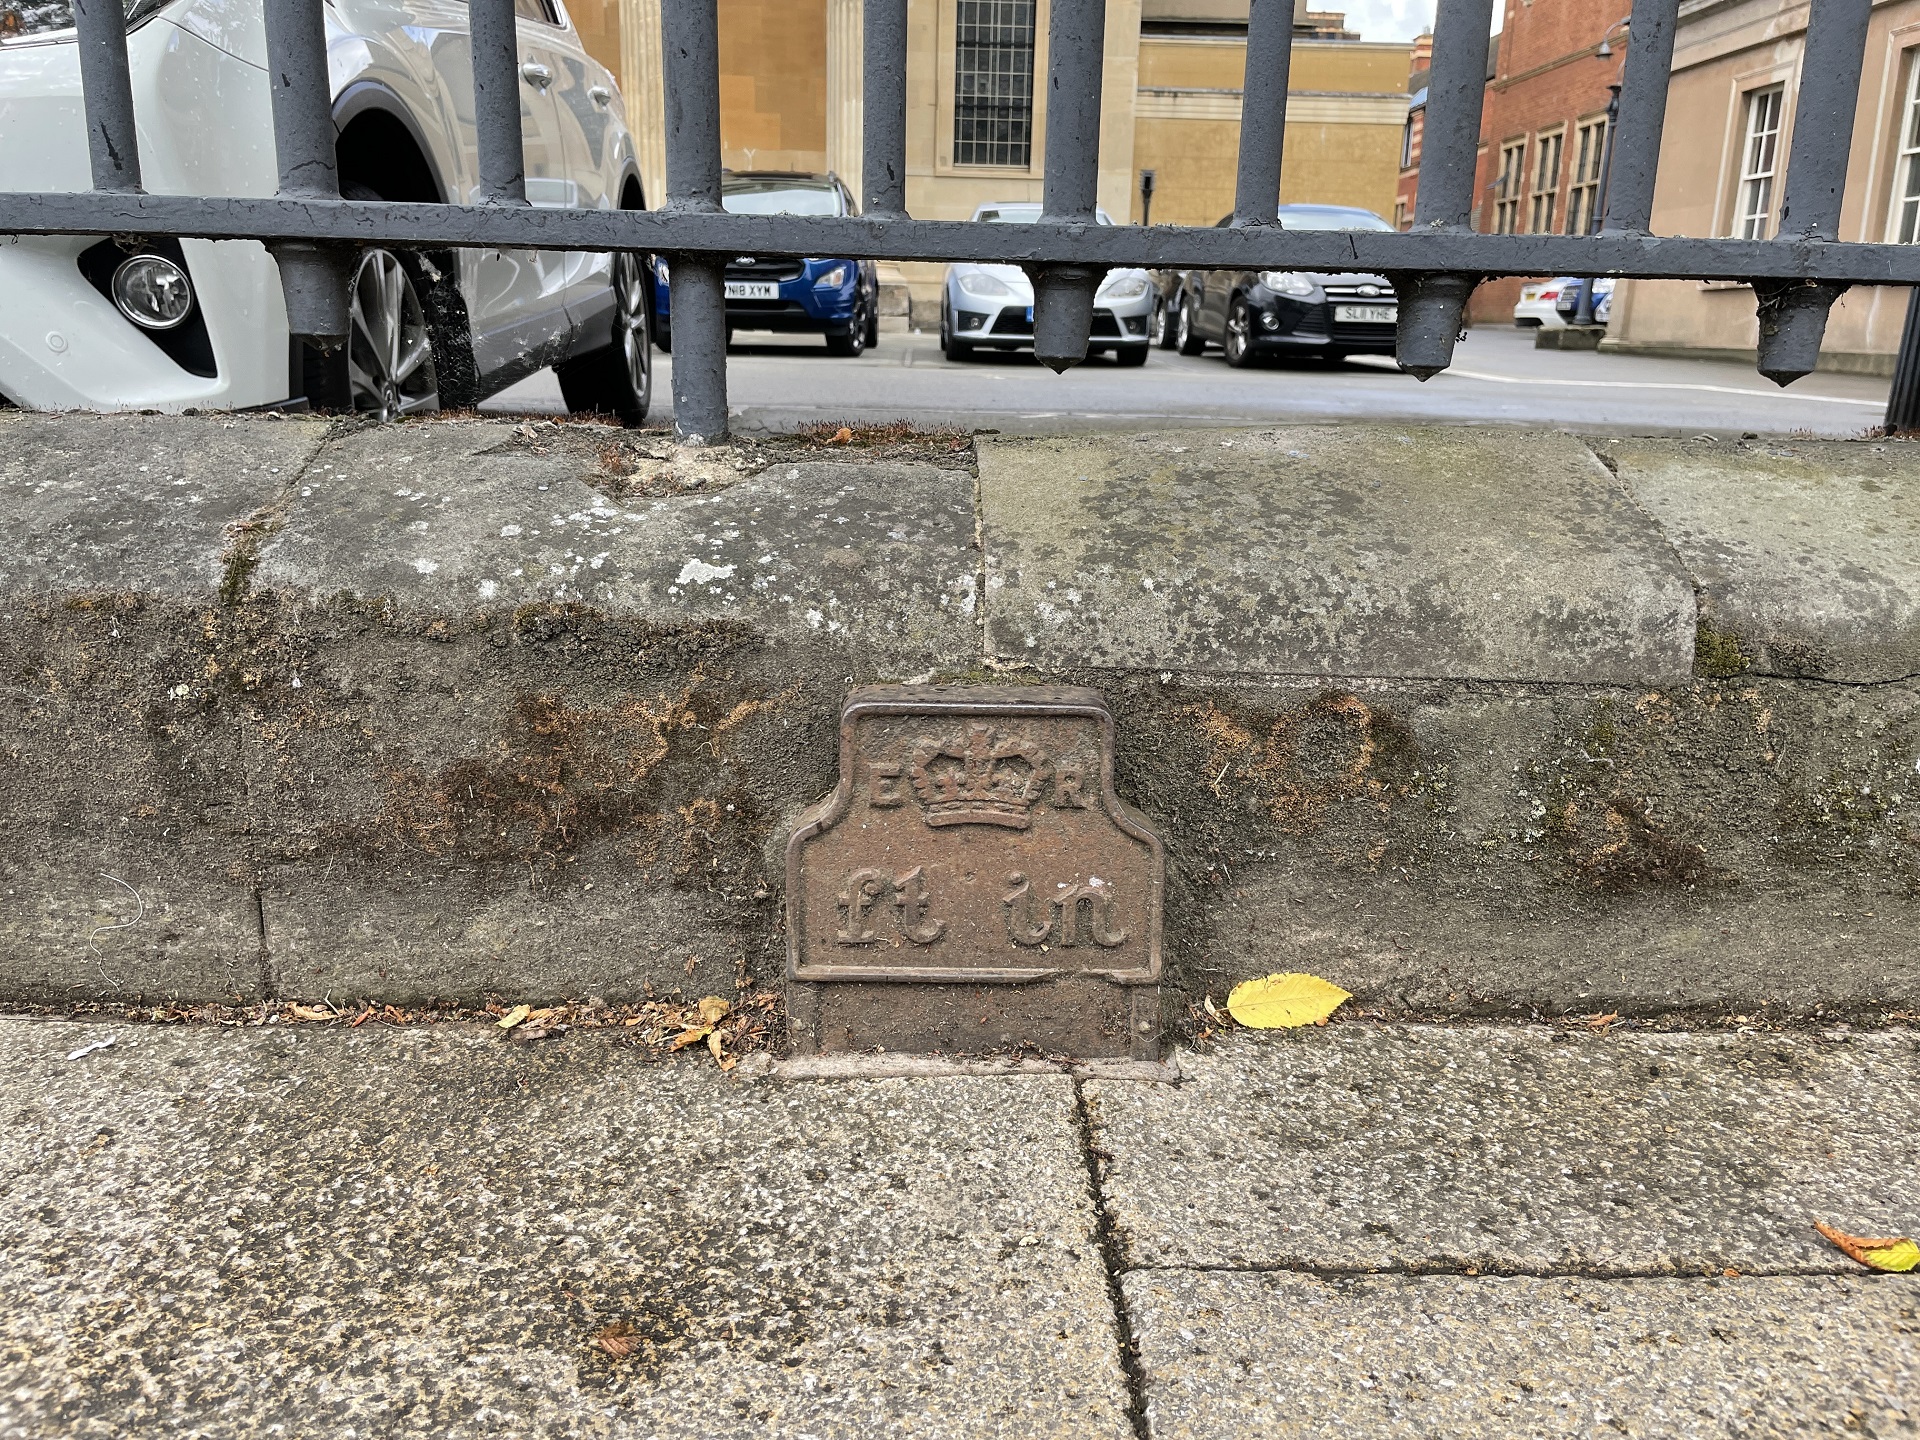 Telegraph cable marker post at The Shirehall, Foregate St, Worcester by Catrin Meredith 